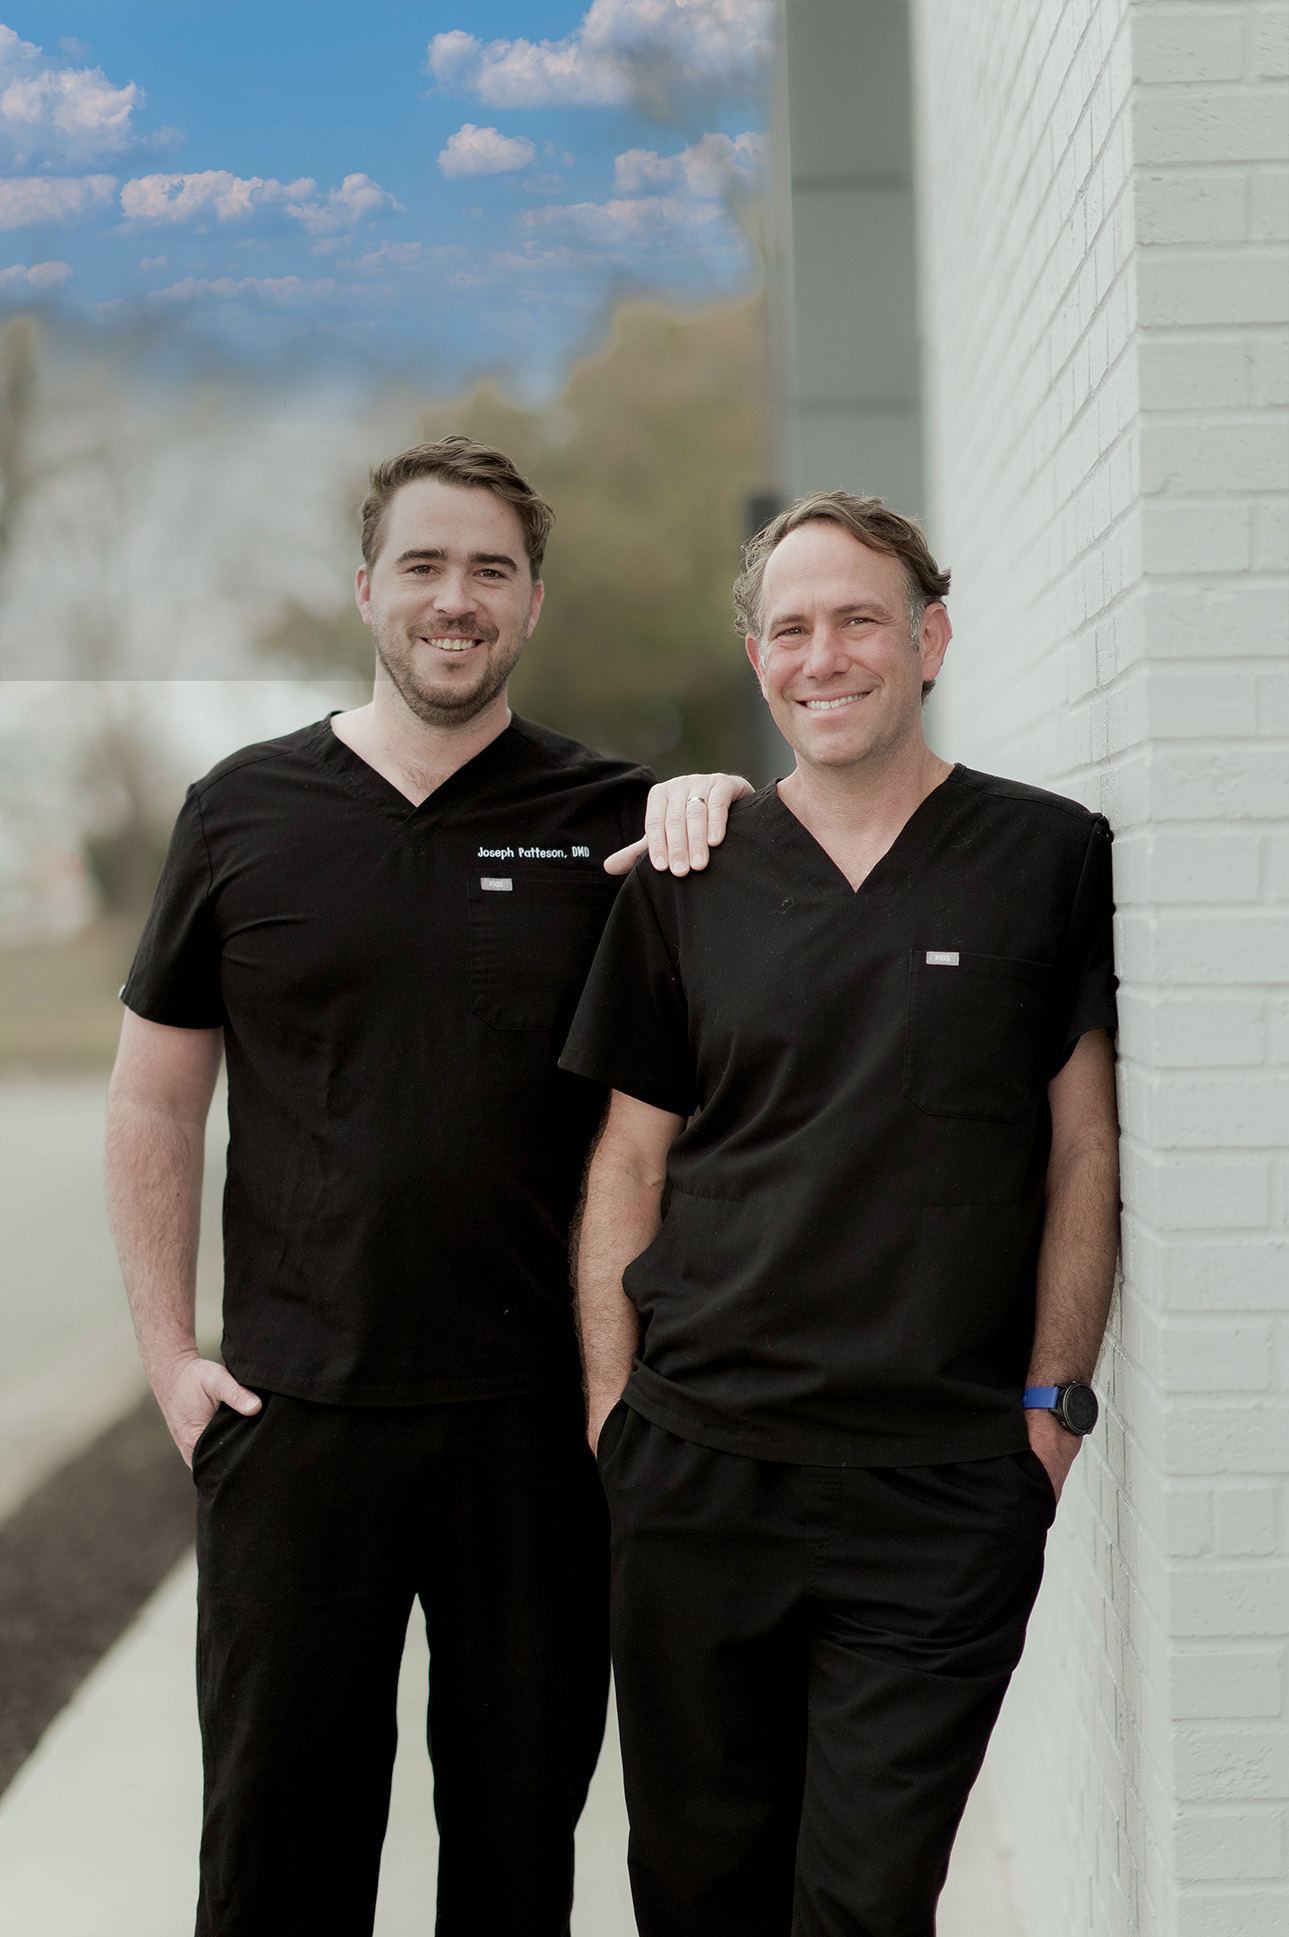 Dr. Mike Mango and Dr. Joe Patteson dentist in Greensboro NC